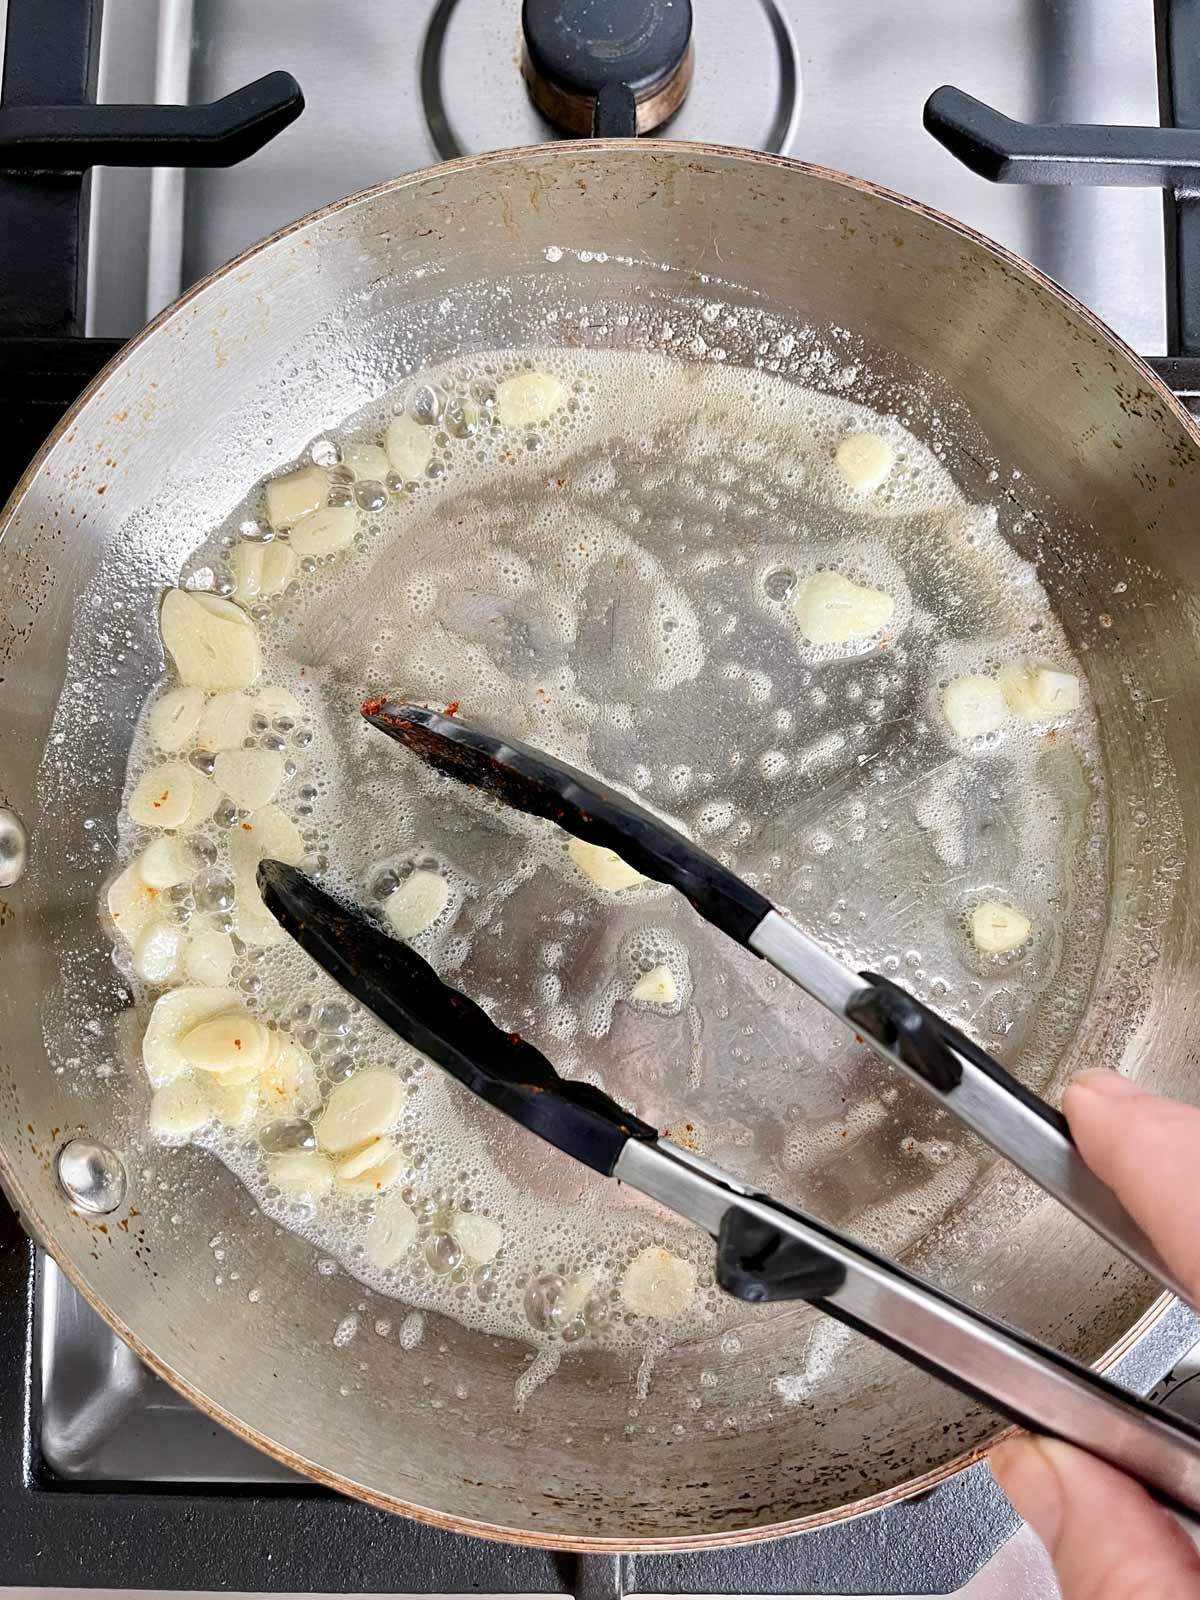 Removing garlic slices from pan with tongs